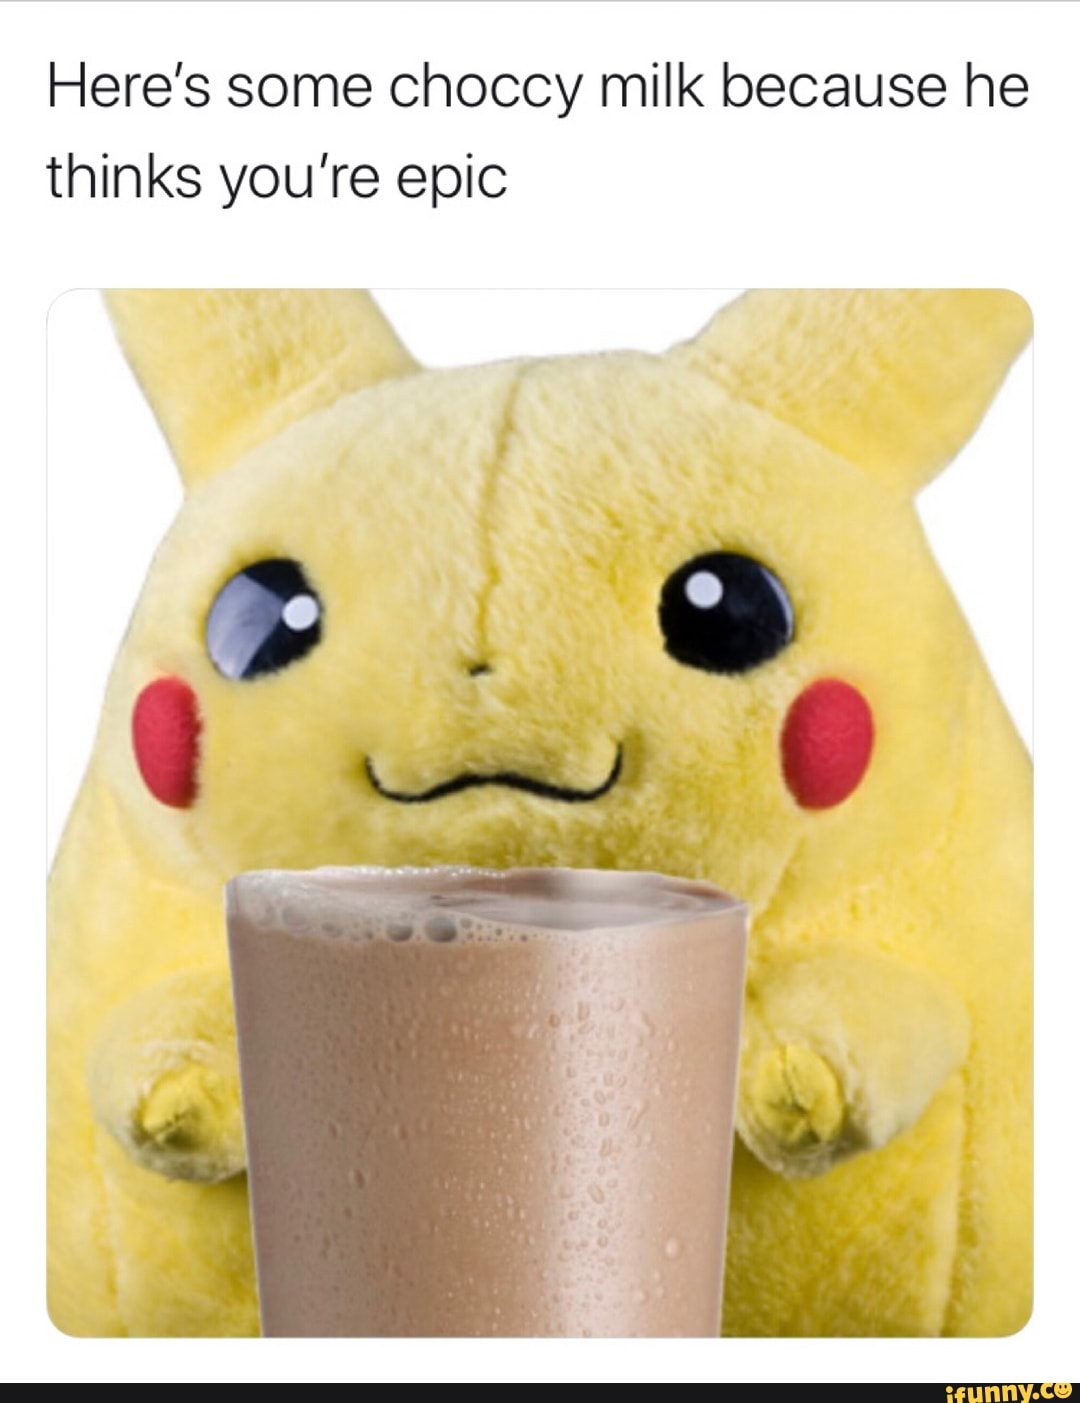 Here's some Choccy milk because he thinks you're epic - iFunny :)